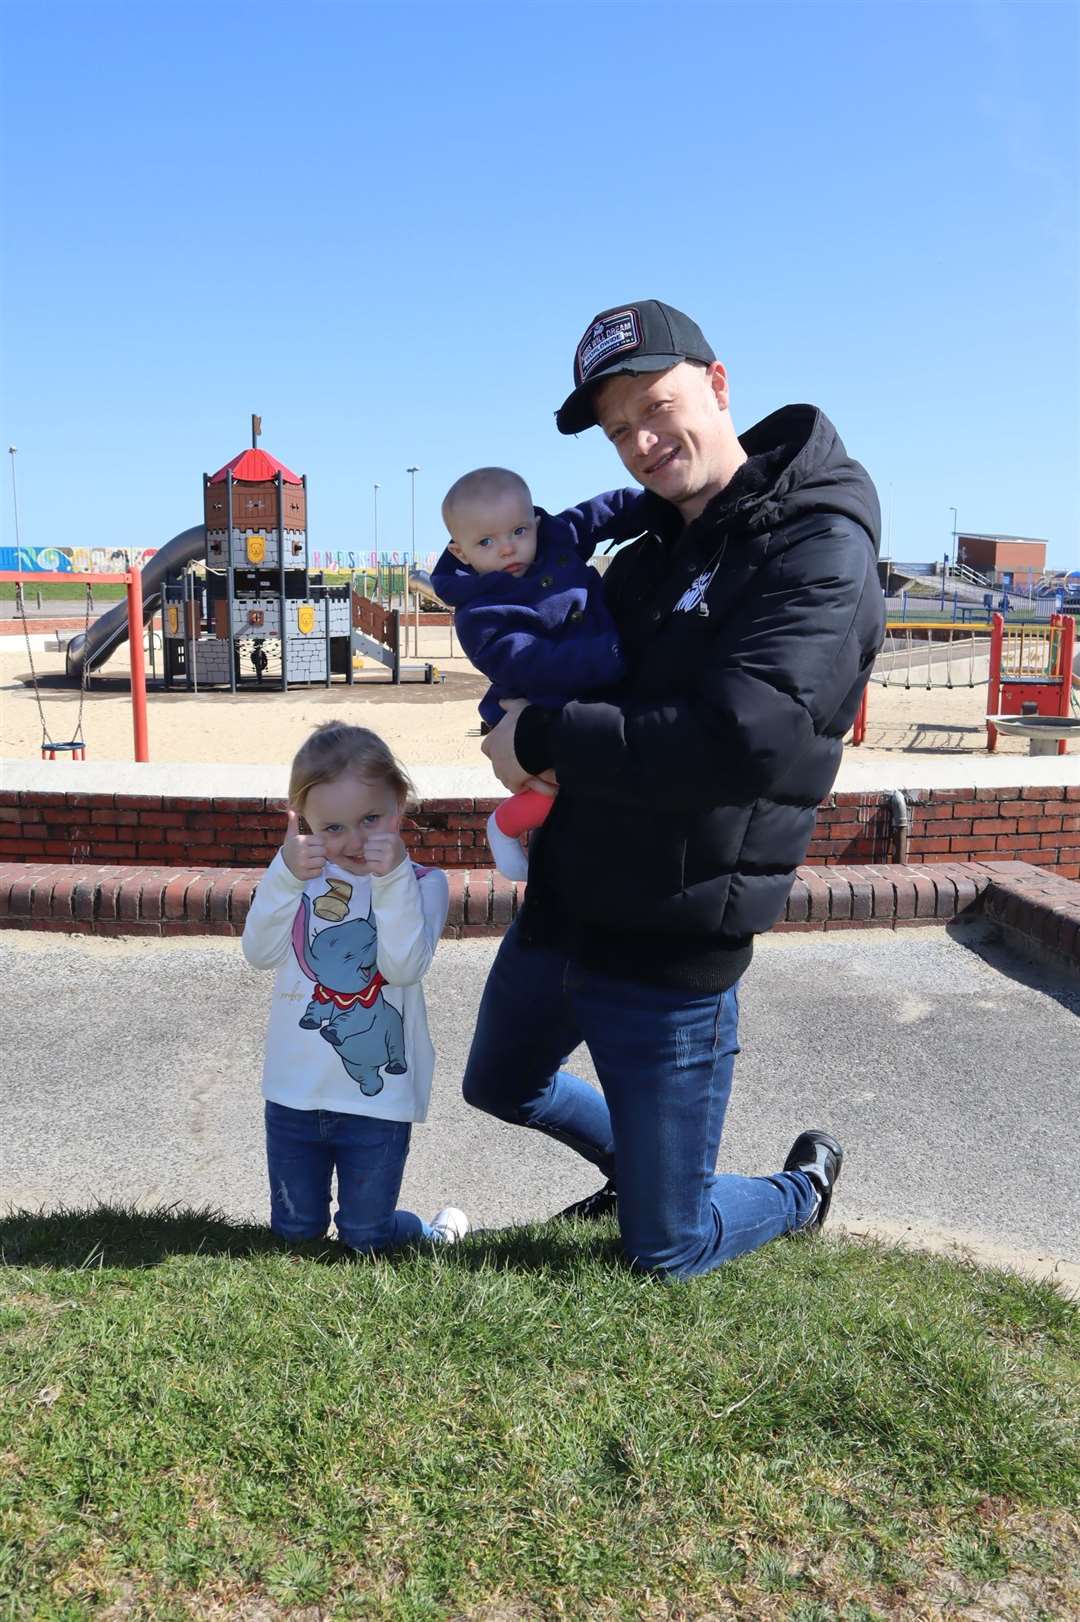 Dad-of-four Jamie Askew, 33, of Sheerness, said it was the "best Monday ever" as some of the Covid-19 restrictions were eased